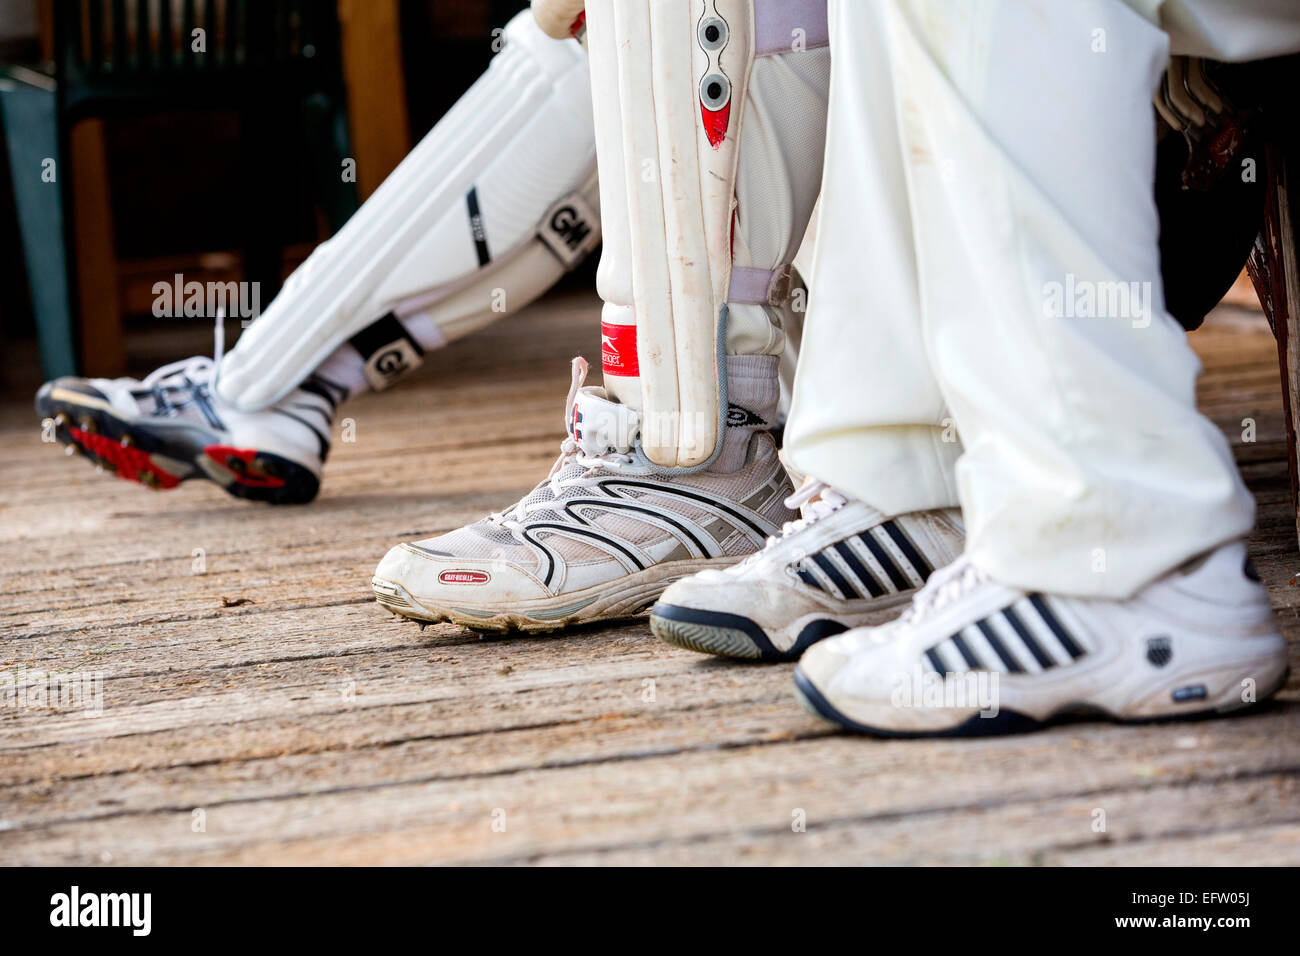 Cricket players wearing cricket whites and trainers, low section Stock Photo